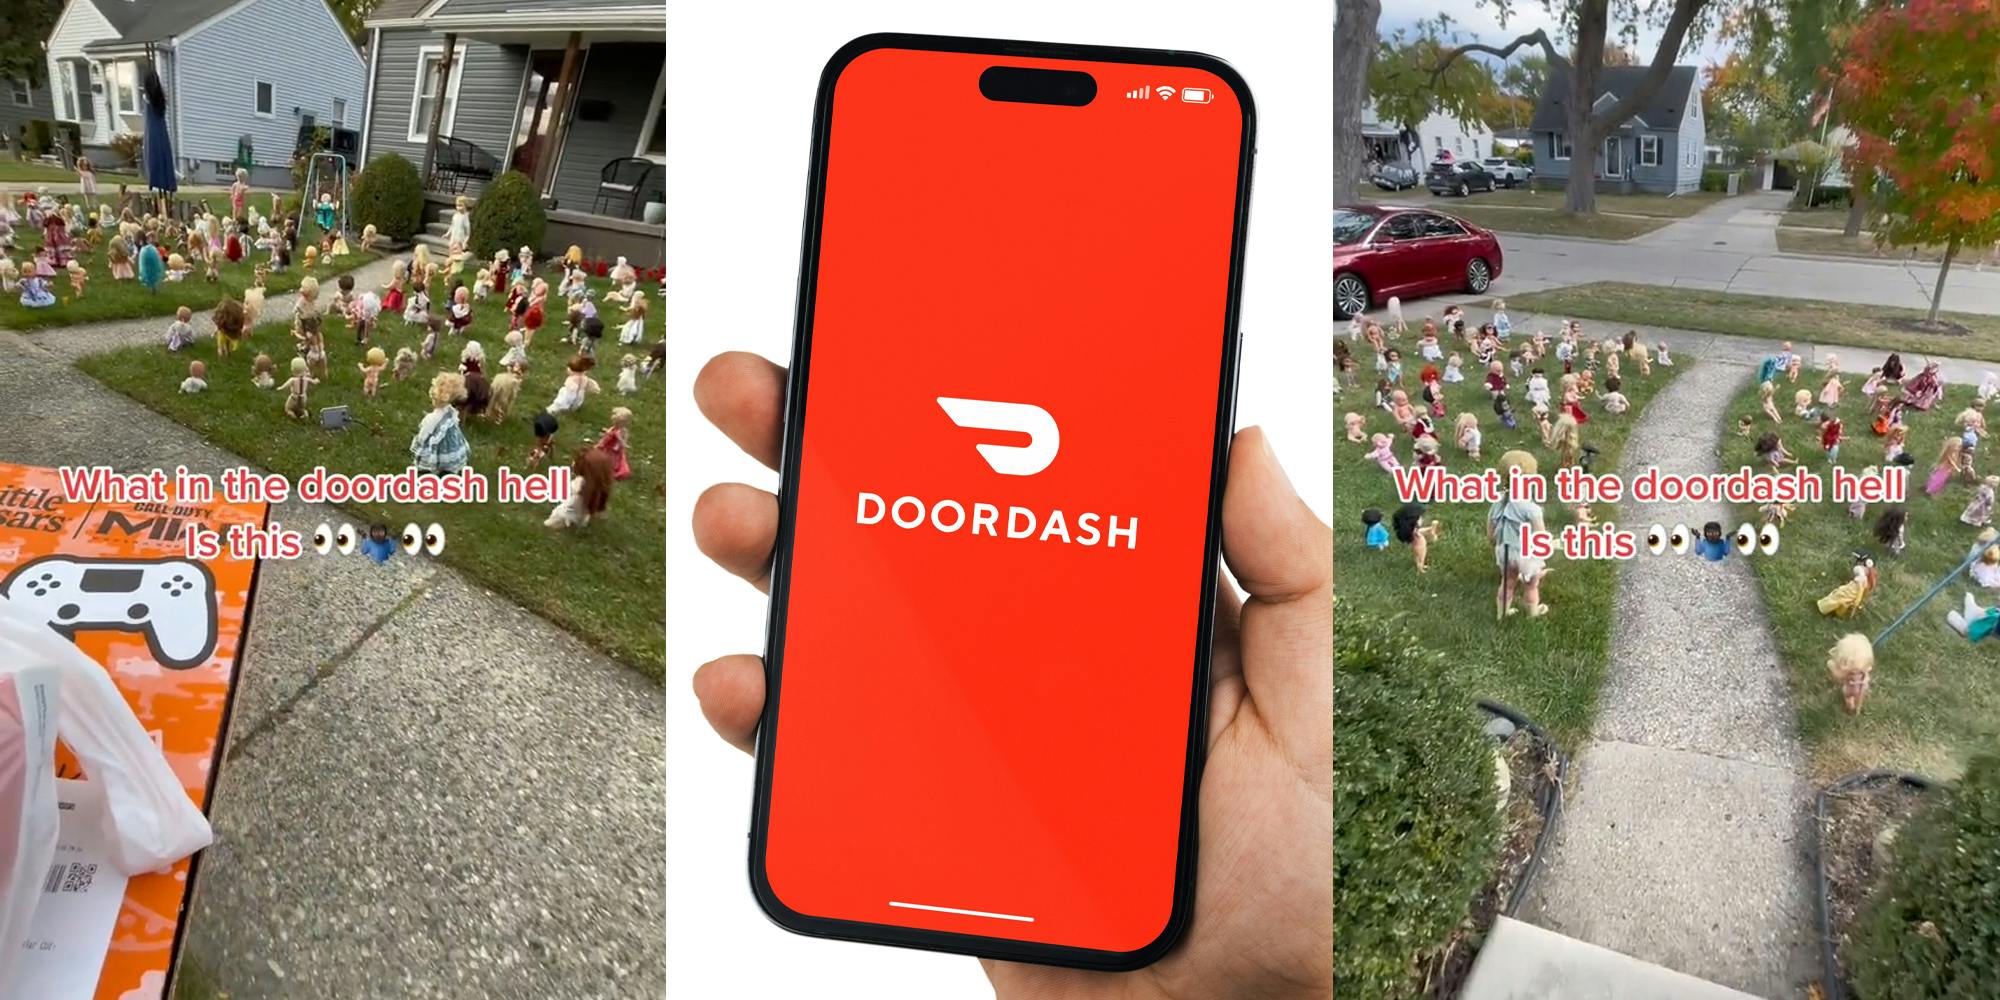 DoorDash driver walking outside of house with yard full of dolls with caption "What in the doordash hell is this" (l) DoorDash on phone screen in hand in front of white background (c) DoorDash driver walking outside of house with yard full of dolls with caption "What in the doordash hell is this" (r)